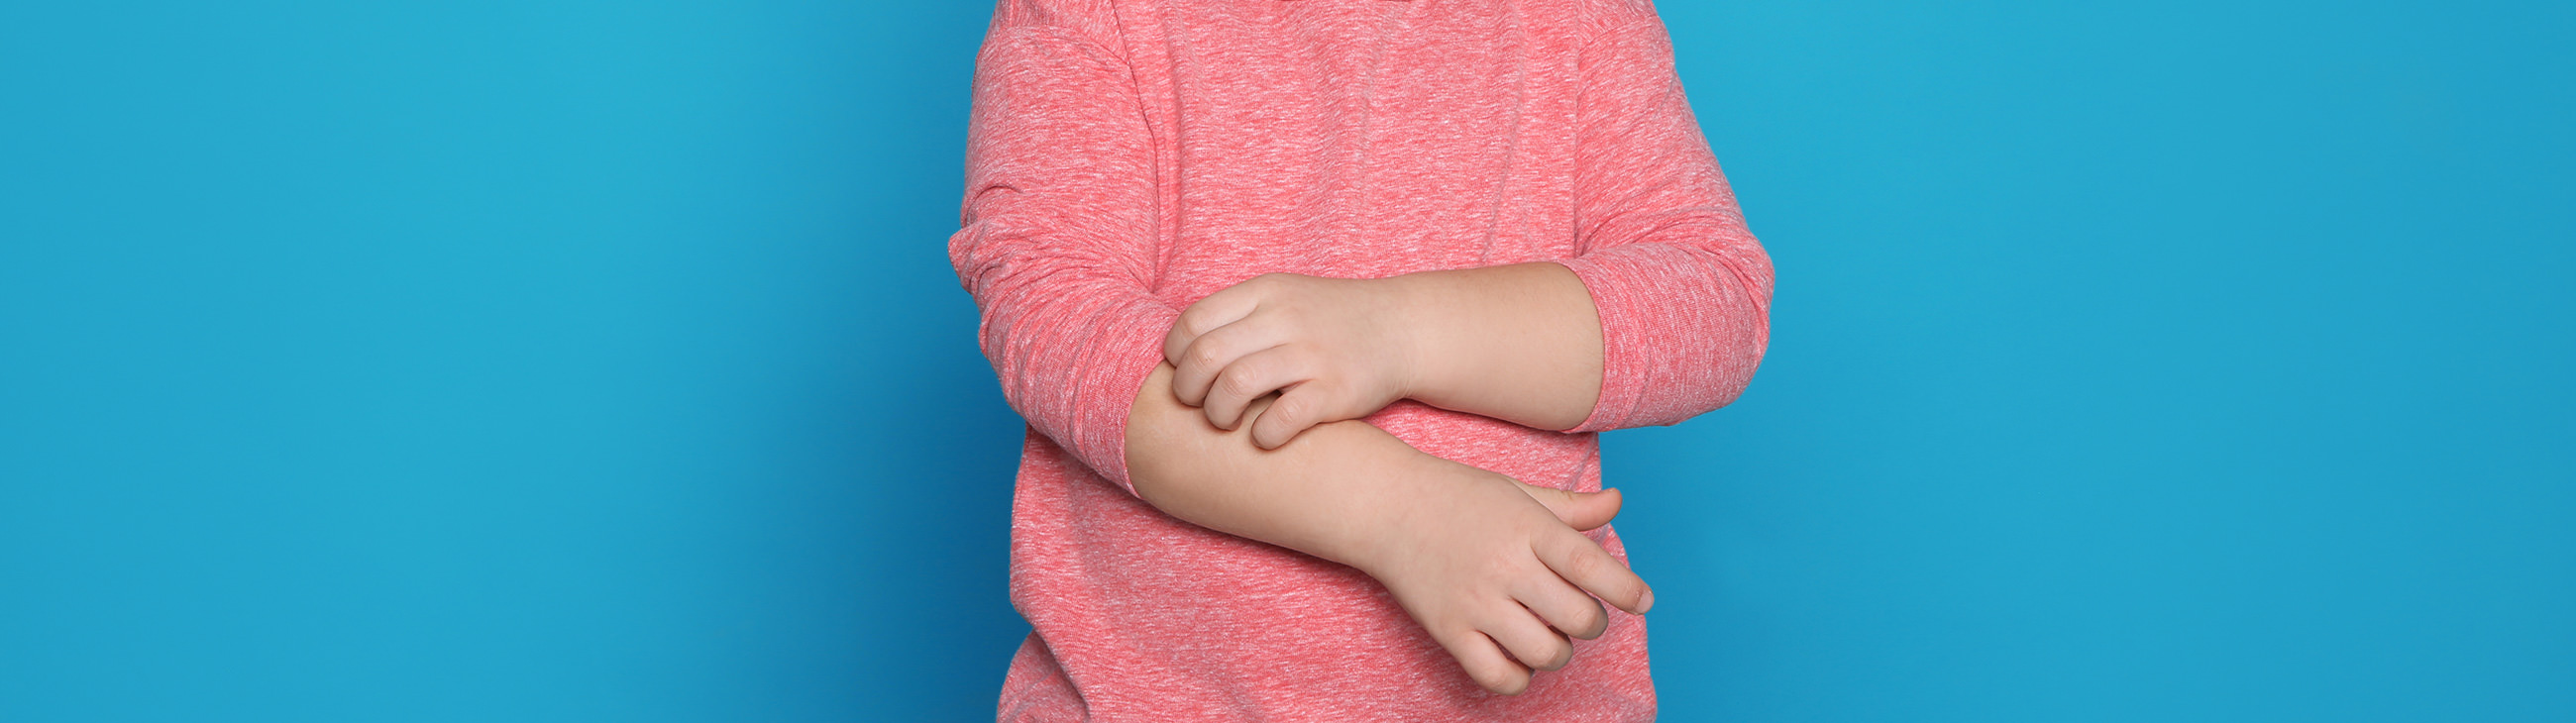 Do you have eczema or scabies? Understand the differences